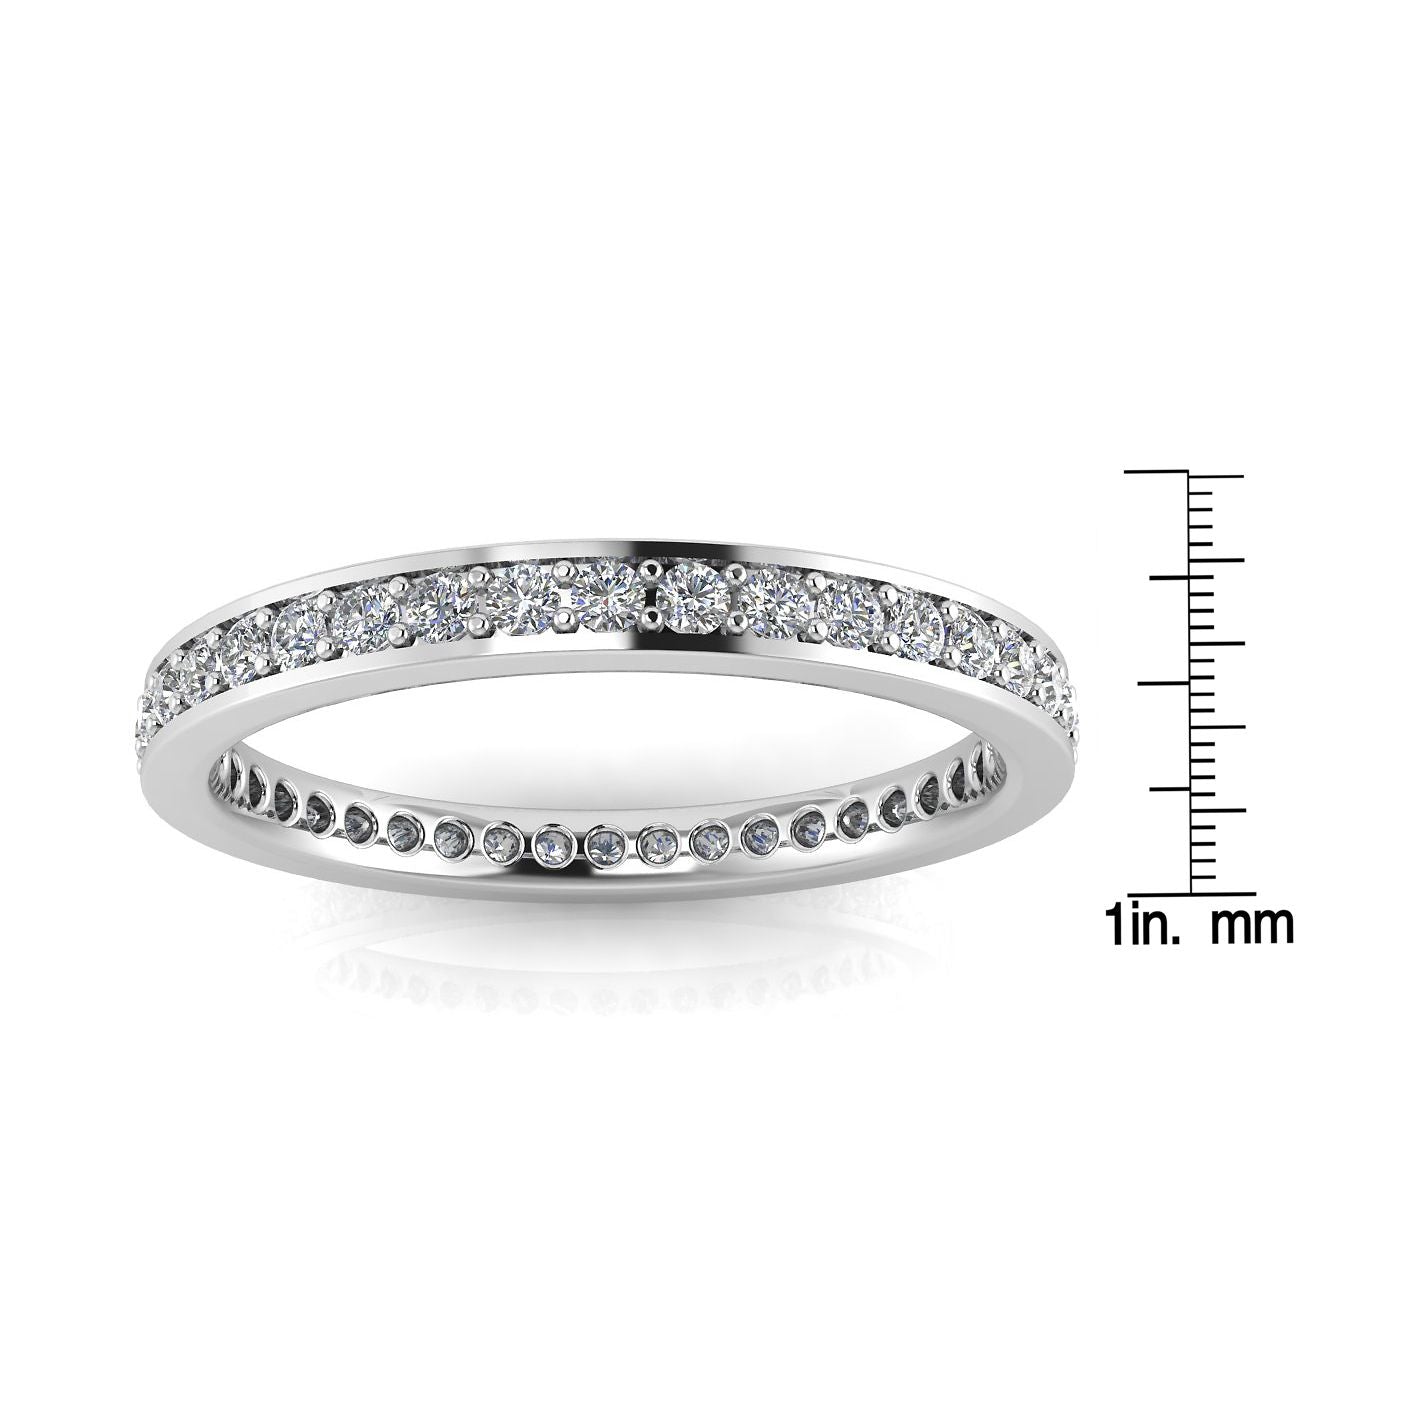 Round Brilliant Cut Diamond Channel Pave Set Eternity Ring In 14k White Gold  (0.33ct. Tw.) Ring Size 7.5